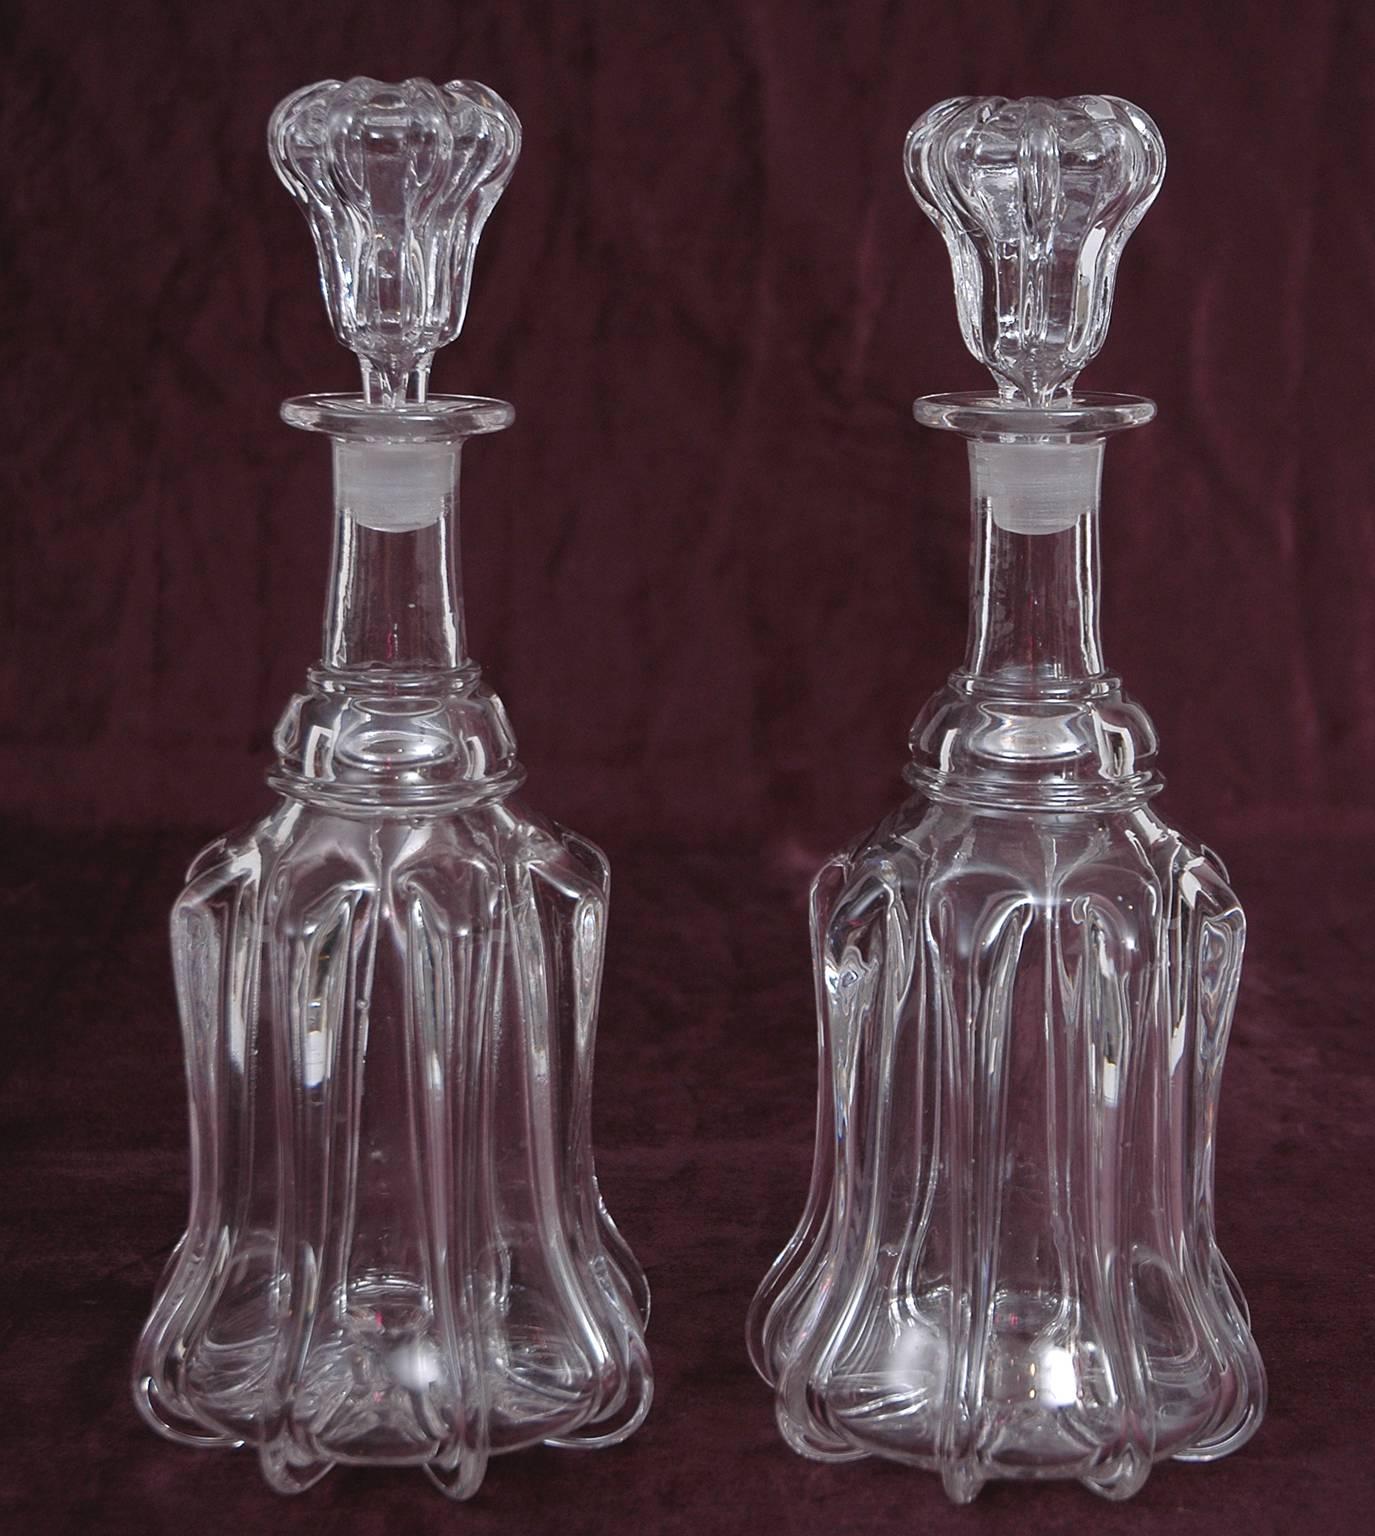 A fine pair of octagonal, molded blown-glass decanters for port, sherry and Madeira in shouldered form with stoppers. England, circa 1730. A popular drink of the wealthy during the 1700s, these fortified wines were decanted to remove any sediments,